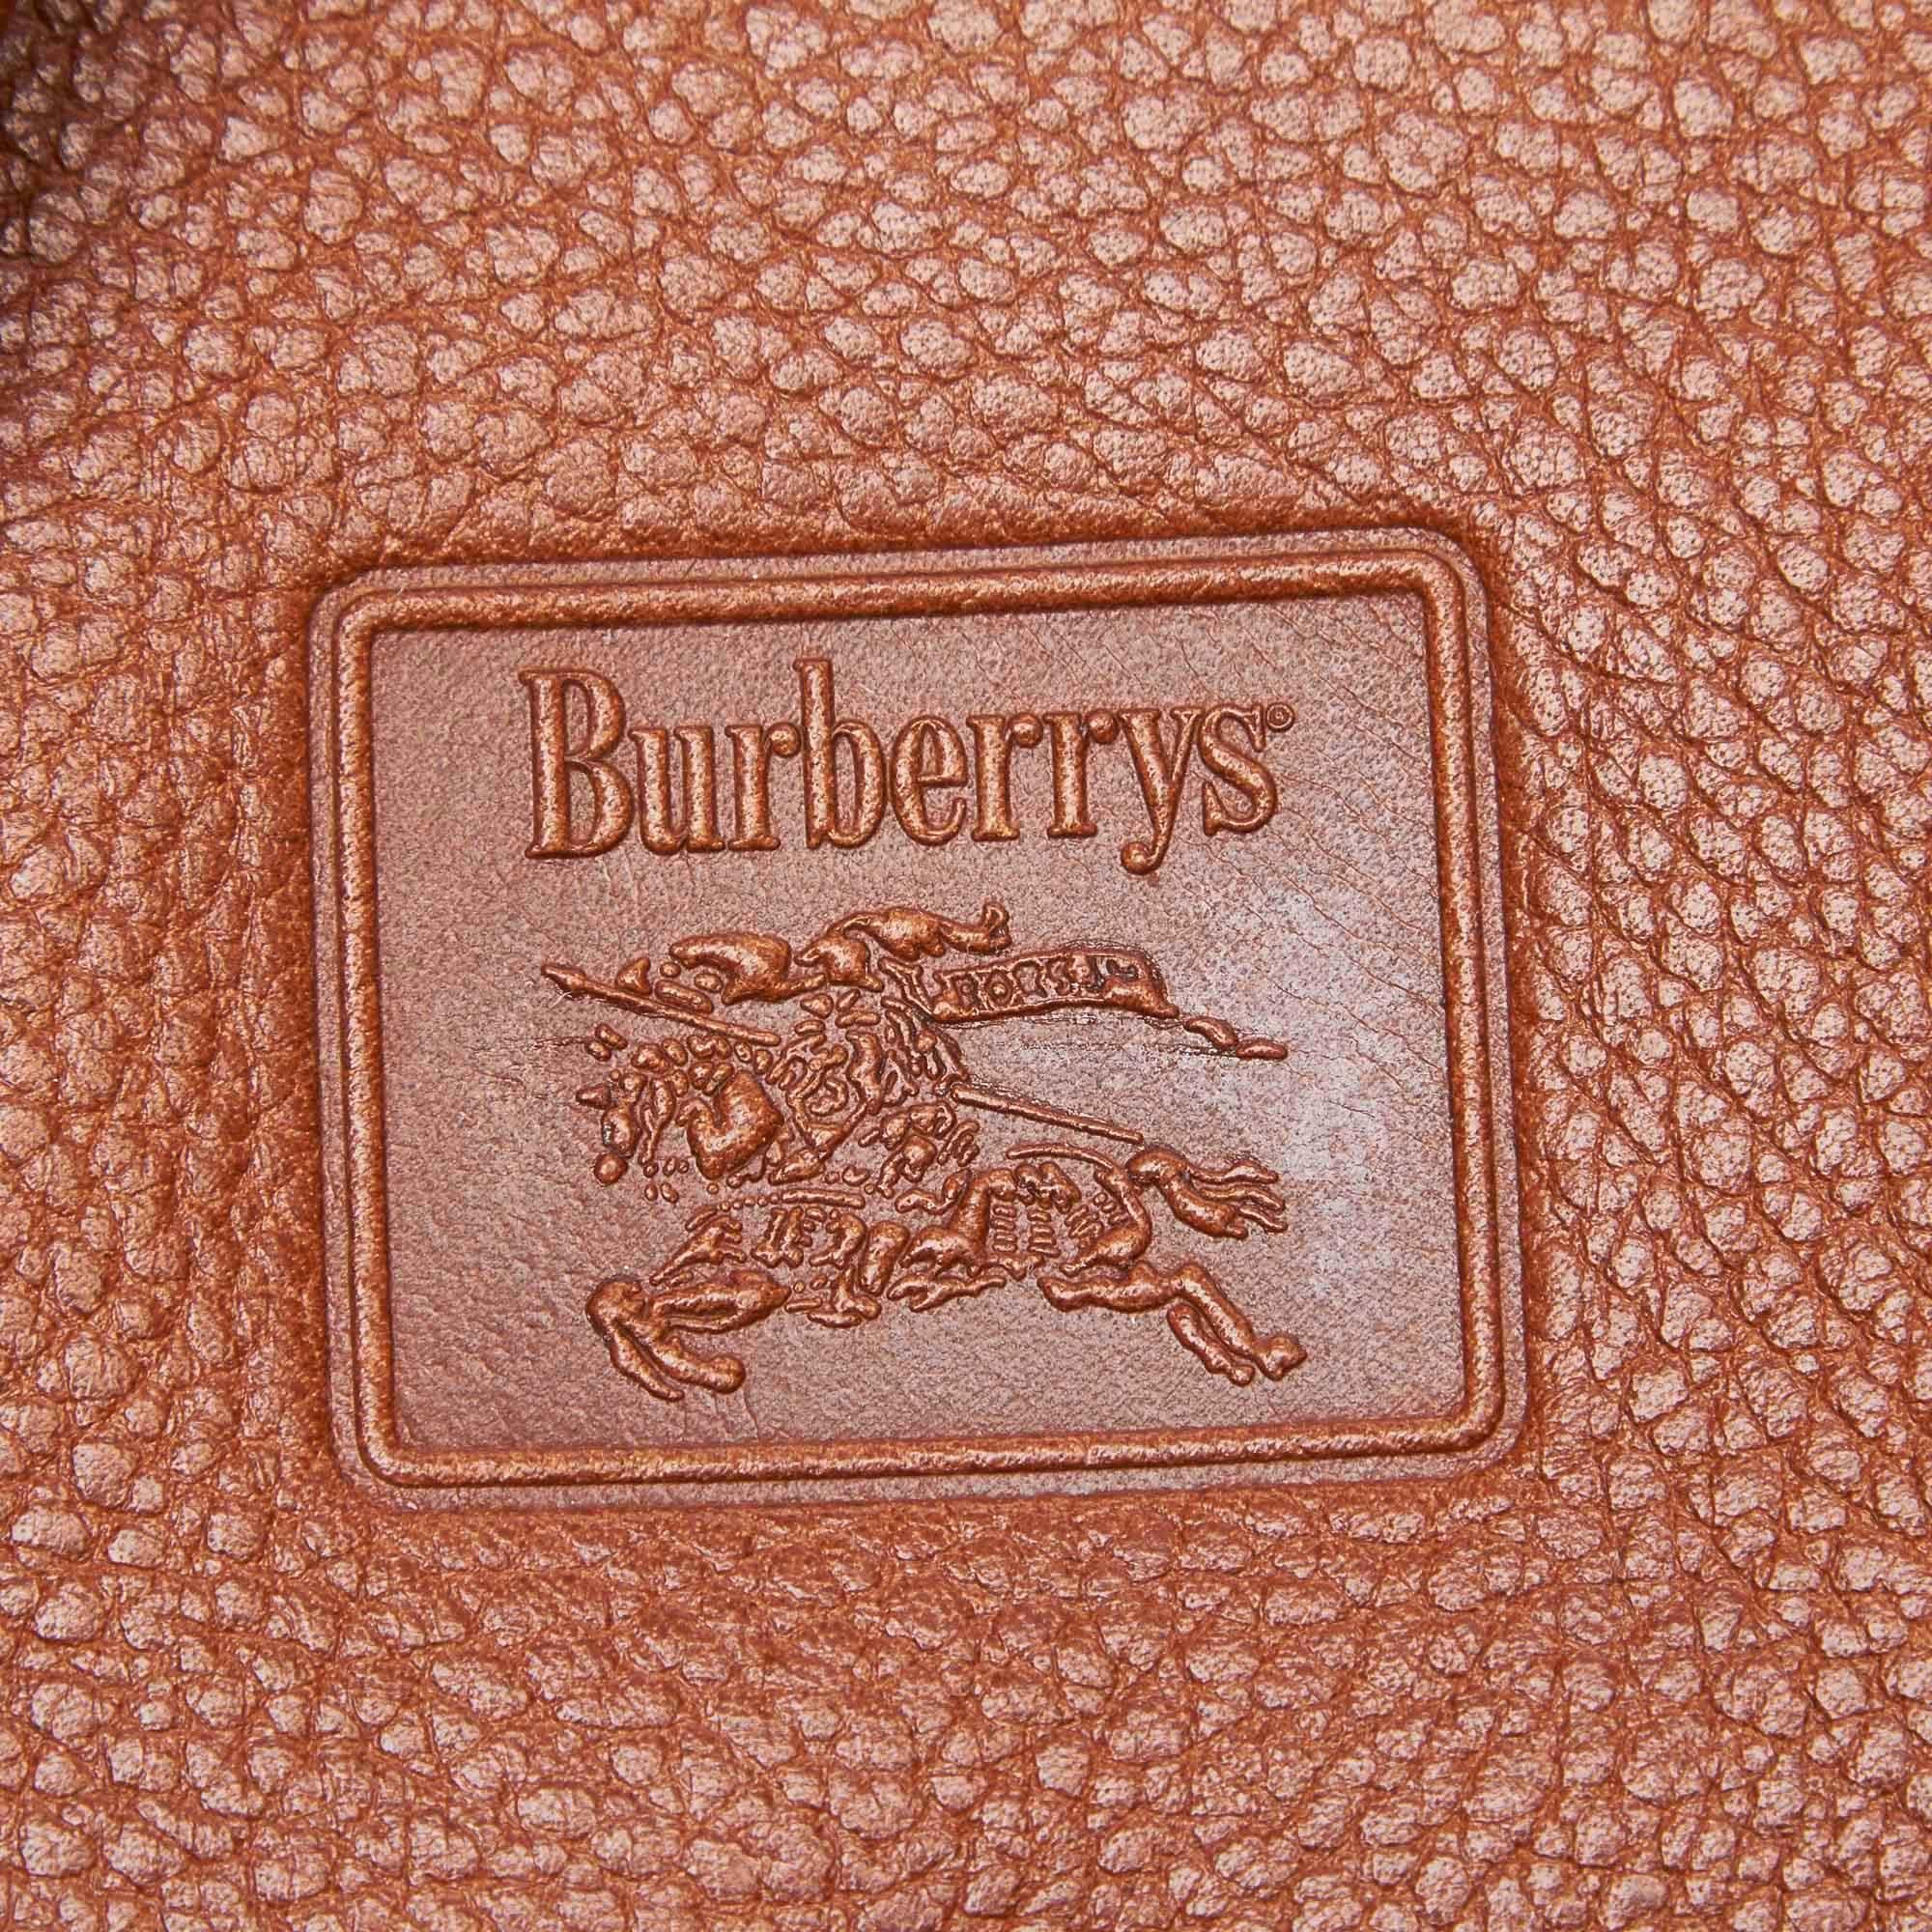 Vintage Authentic Burberry Brown Leather Bucket Bag United Kingdom MEDIUM  In Good Condition For Sale In Orlando, FL